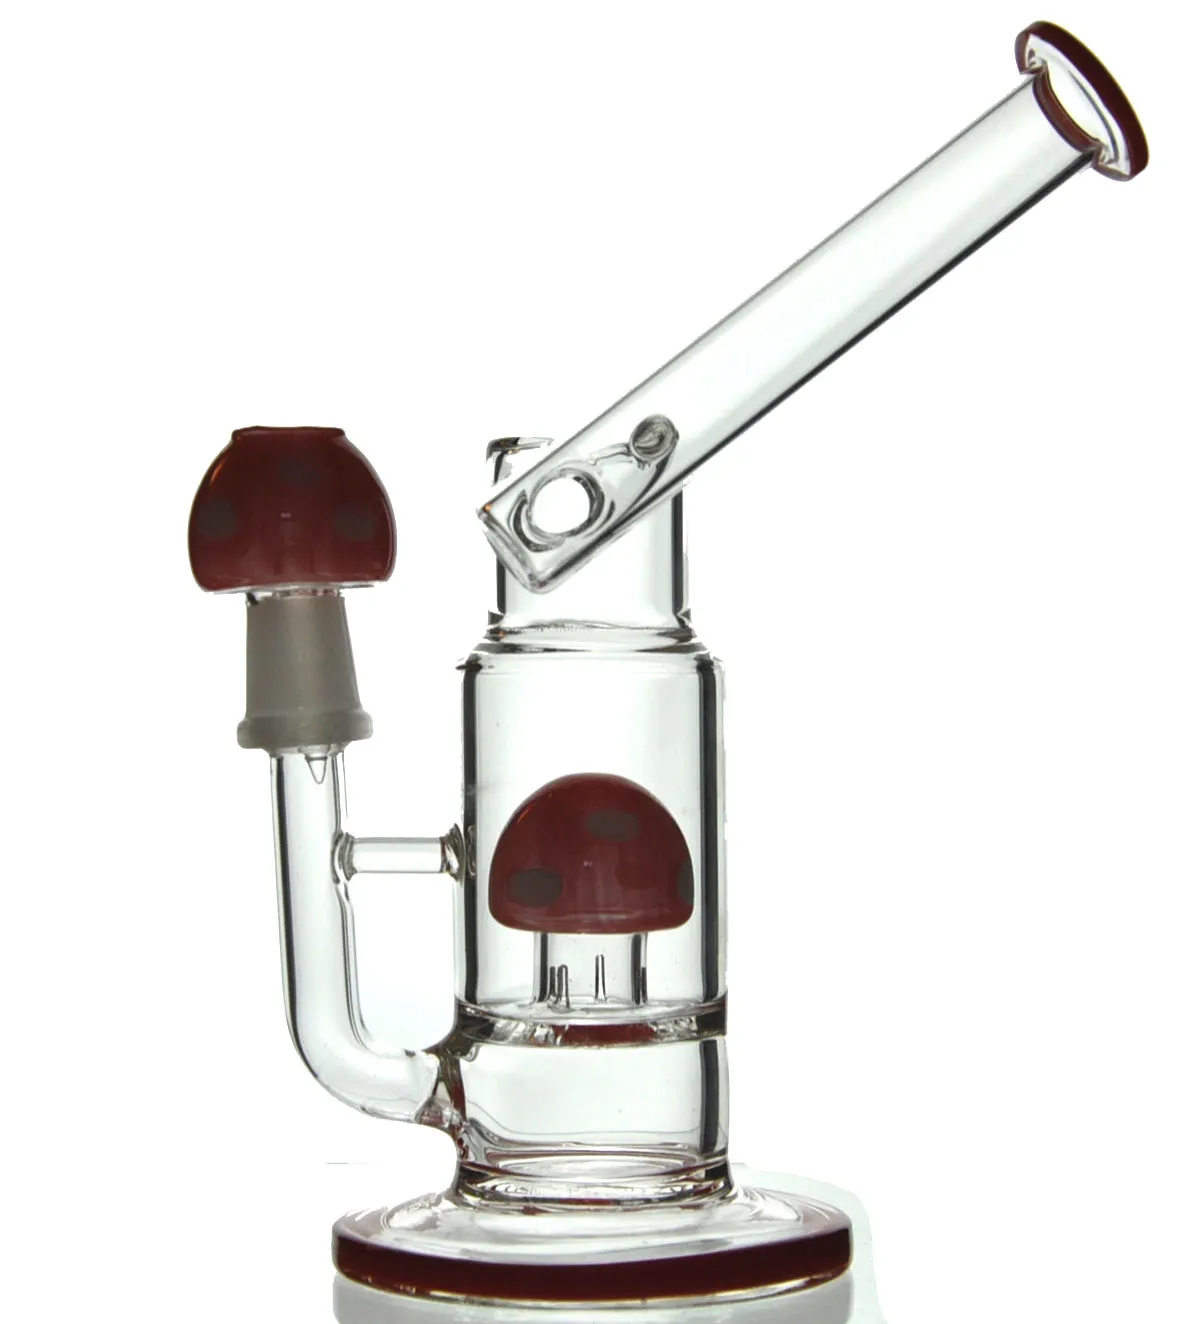 7 Inch Mushroom Filter Glass Bong Oil Rigs Dab Rig 14MM joint Smoking Water Pipes Turbine Percolator Top Open Glass Bongs